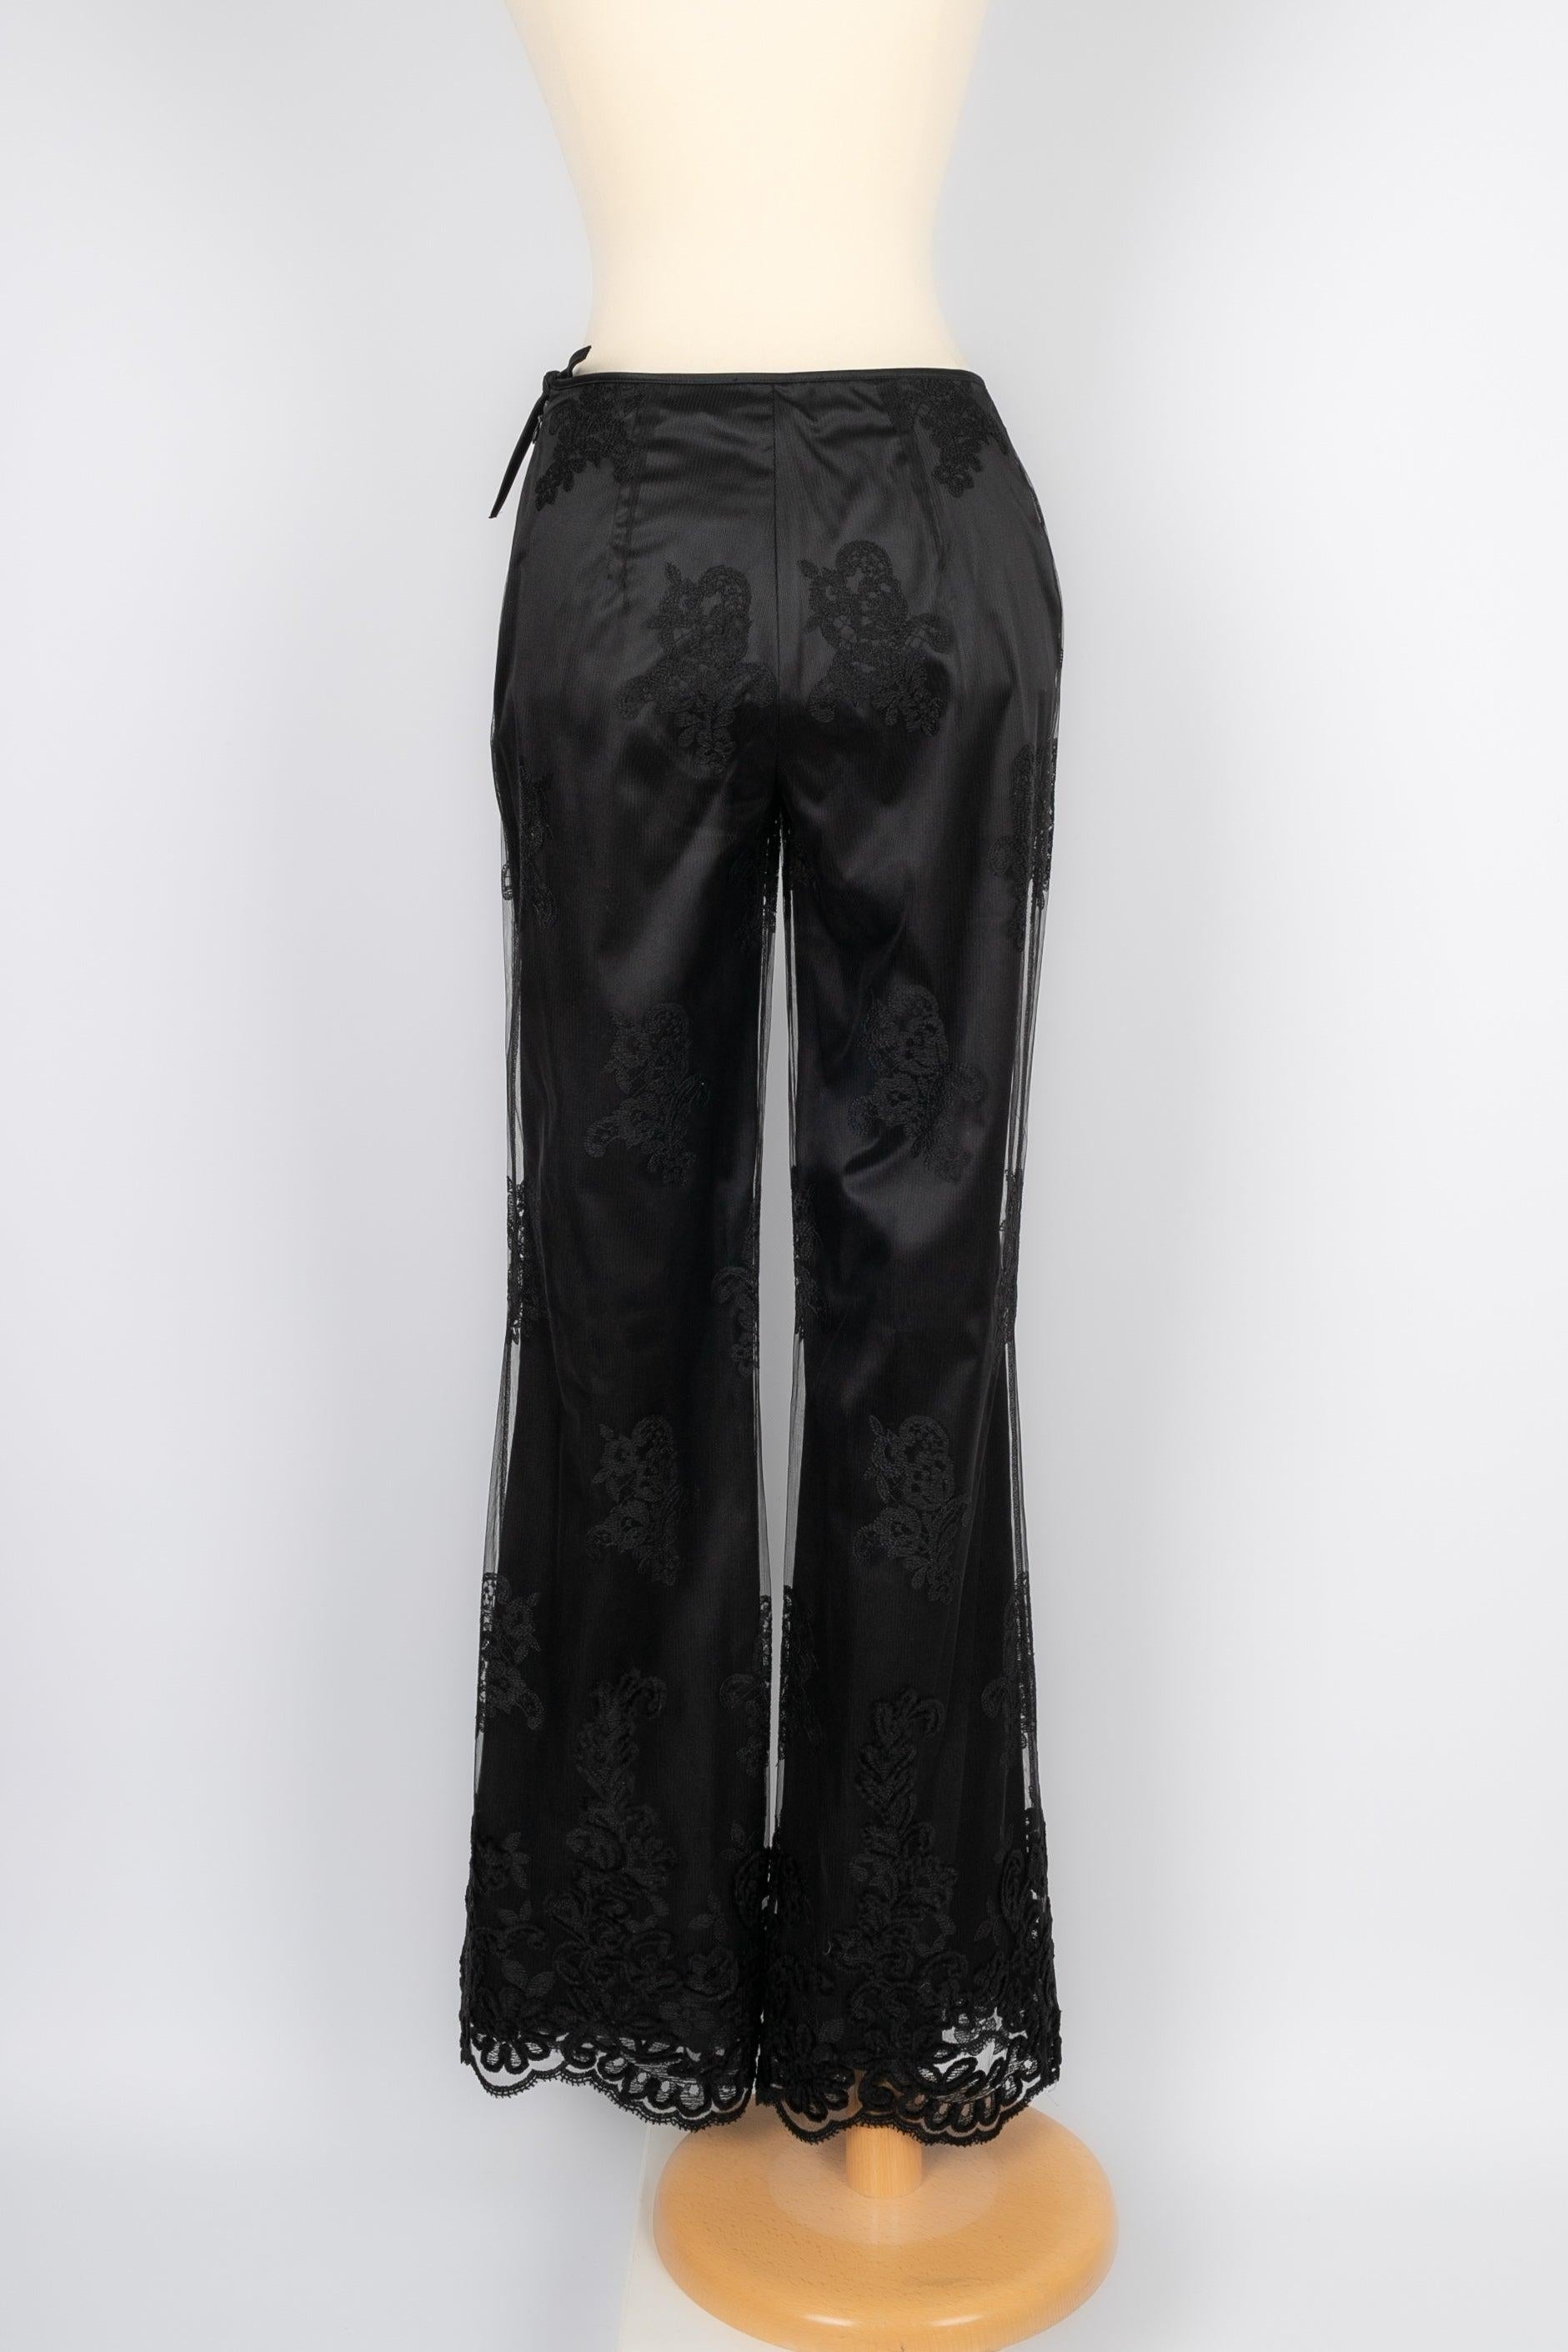 La Perla Black Satin Pants Enlivened with a Tulle Embroidered with Patterns In Excellent Condition For Sale In SAINT-OUEN-SUR-SEINE, FR